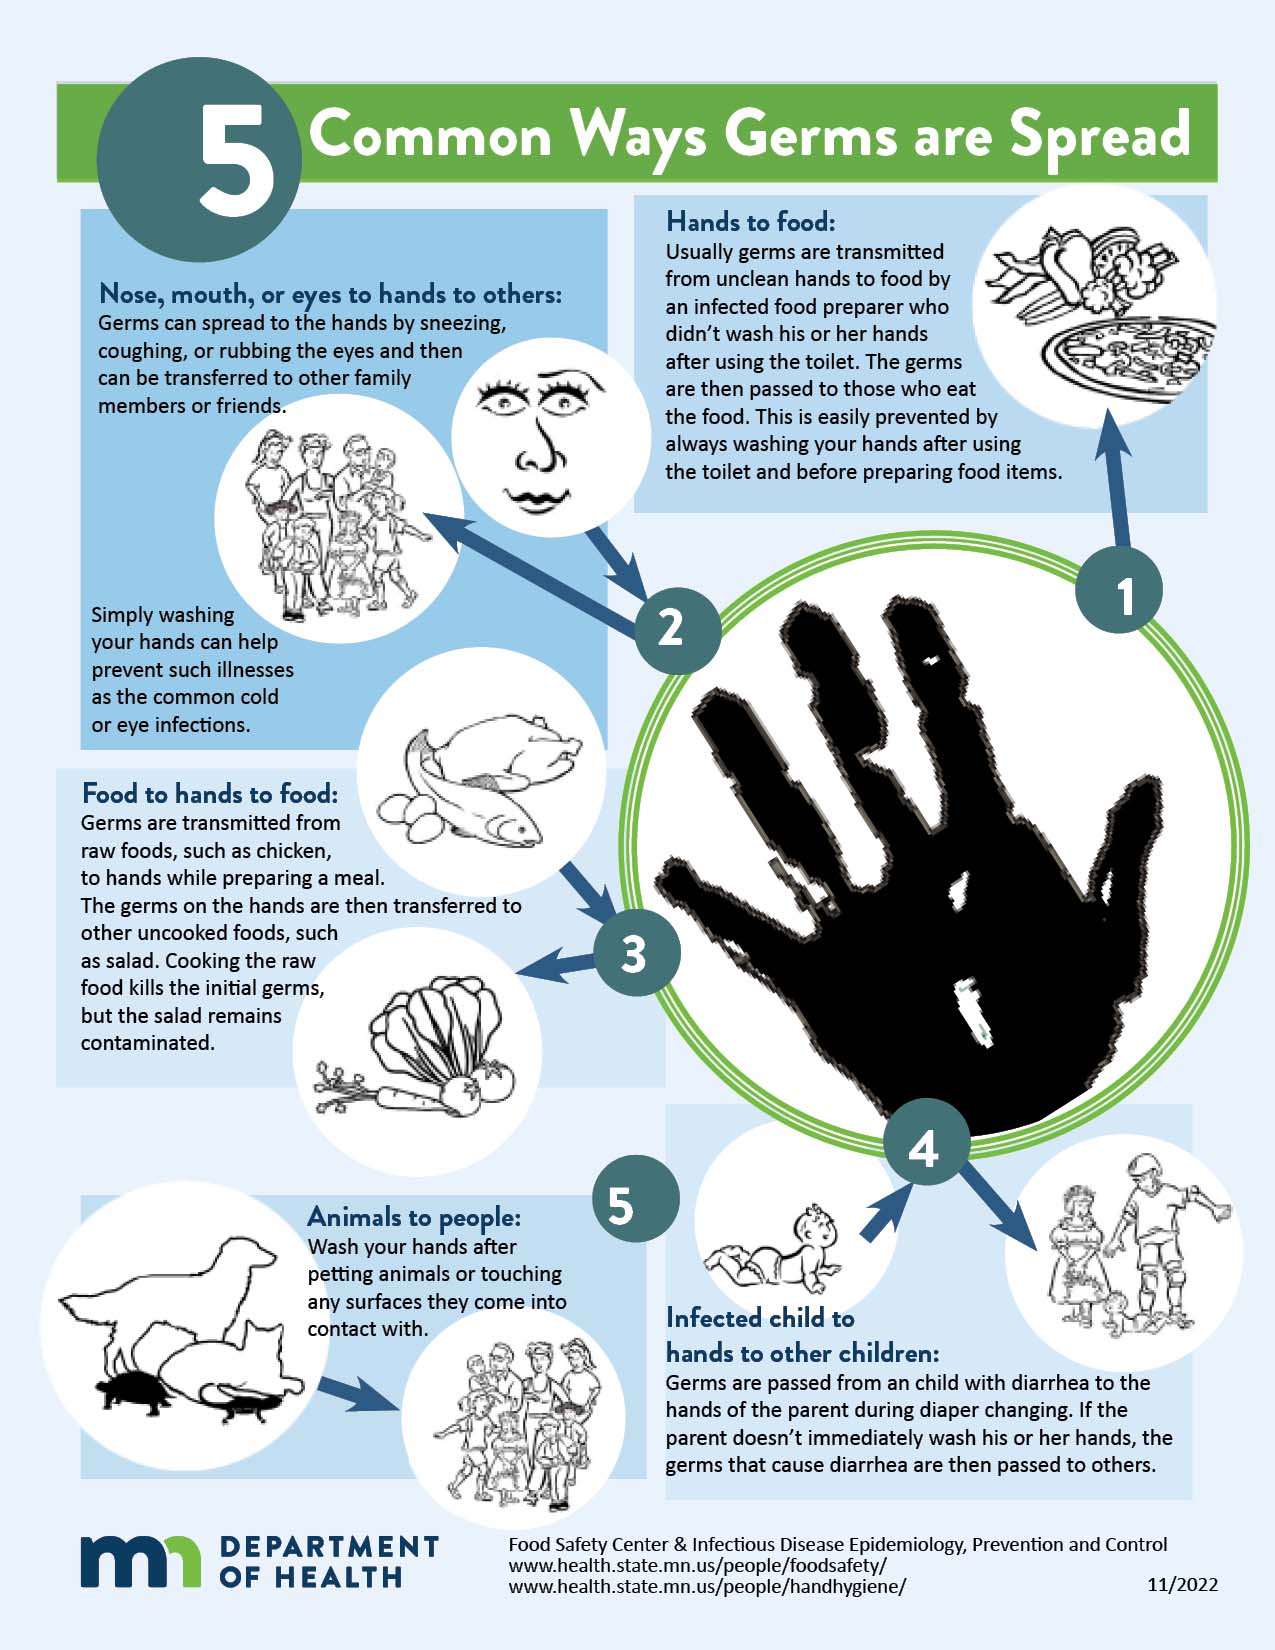 Image of 5 Common Ways Germs Are Spread poster.